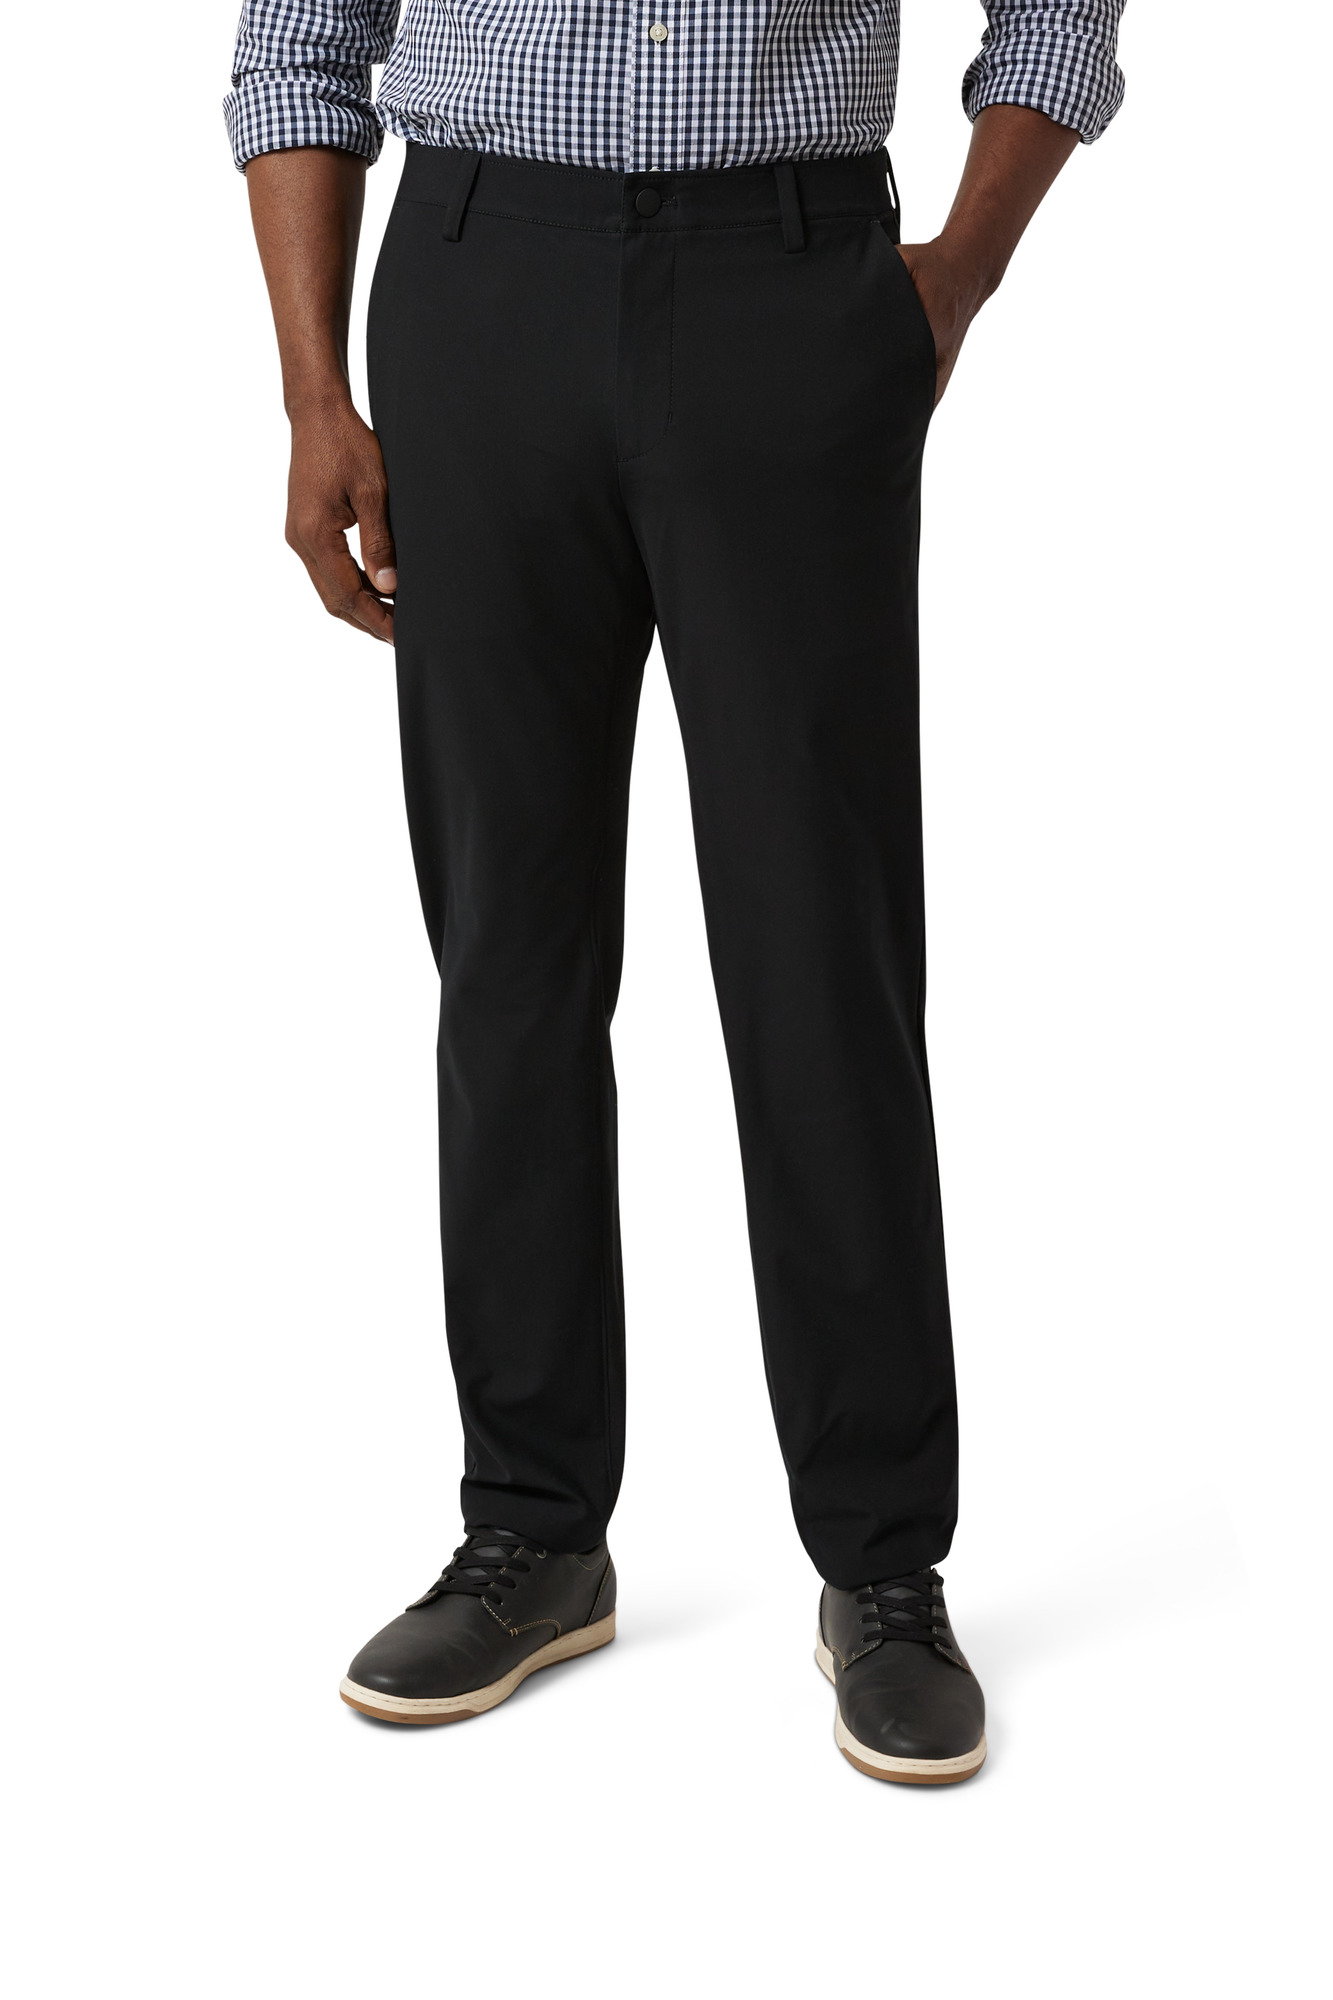 Savane Men's Flat Front Stretch Ultimate Performance Chino Pants with ...